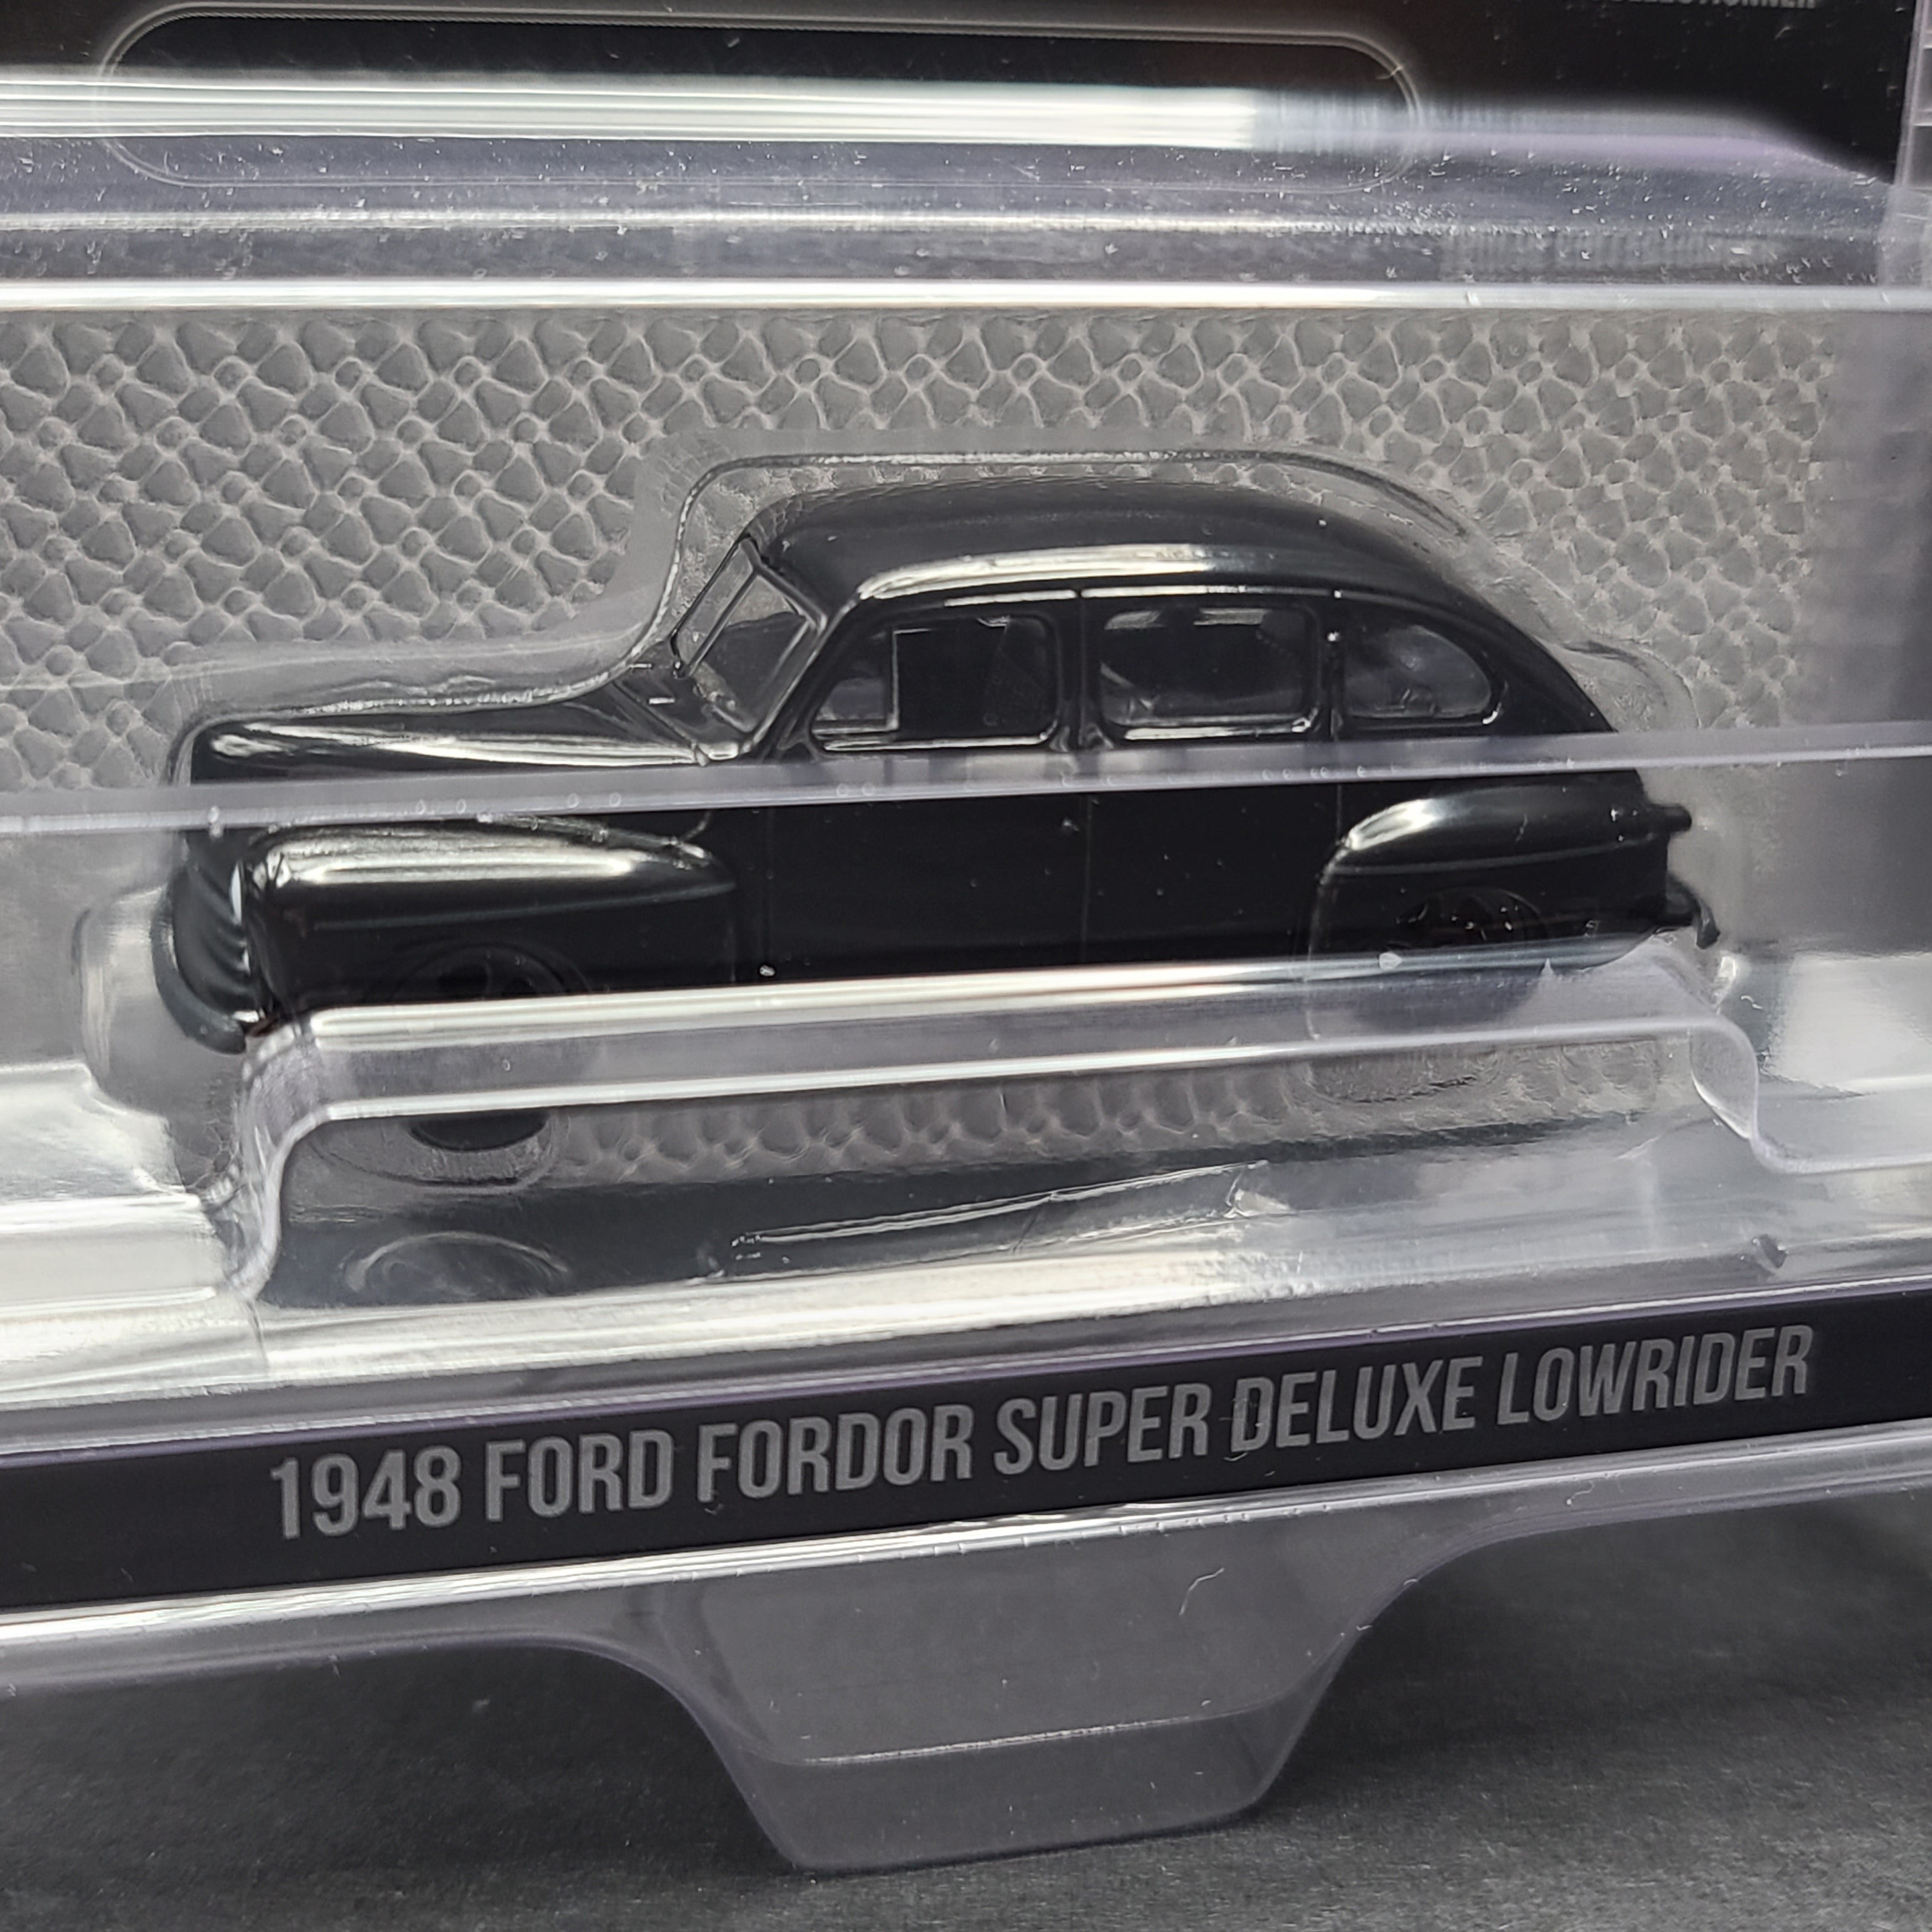 Greenlight '48 Ford Fordor Super Deluxe Lowrider - 1:64 scale (2024 Black Bandit Series 29)